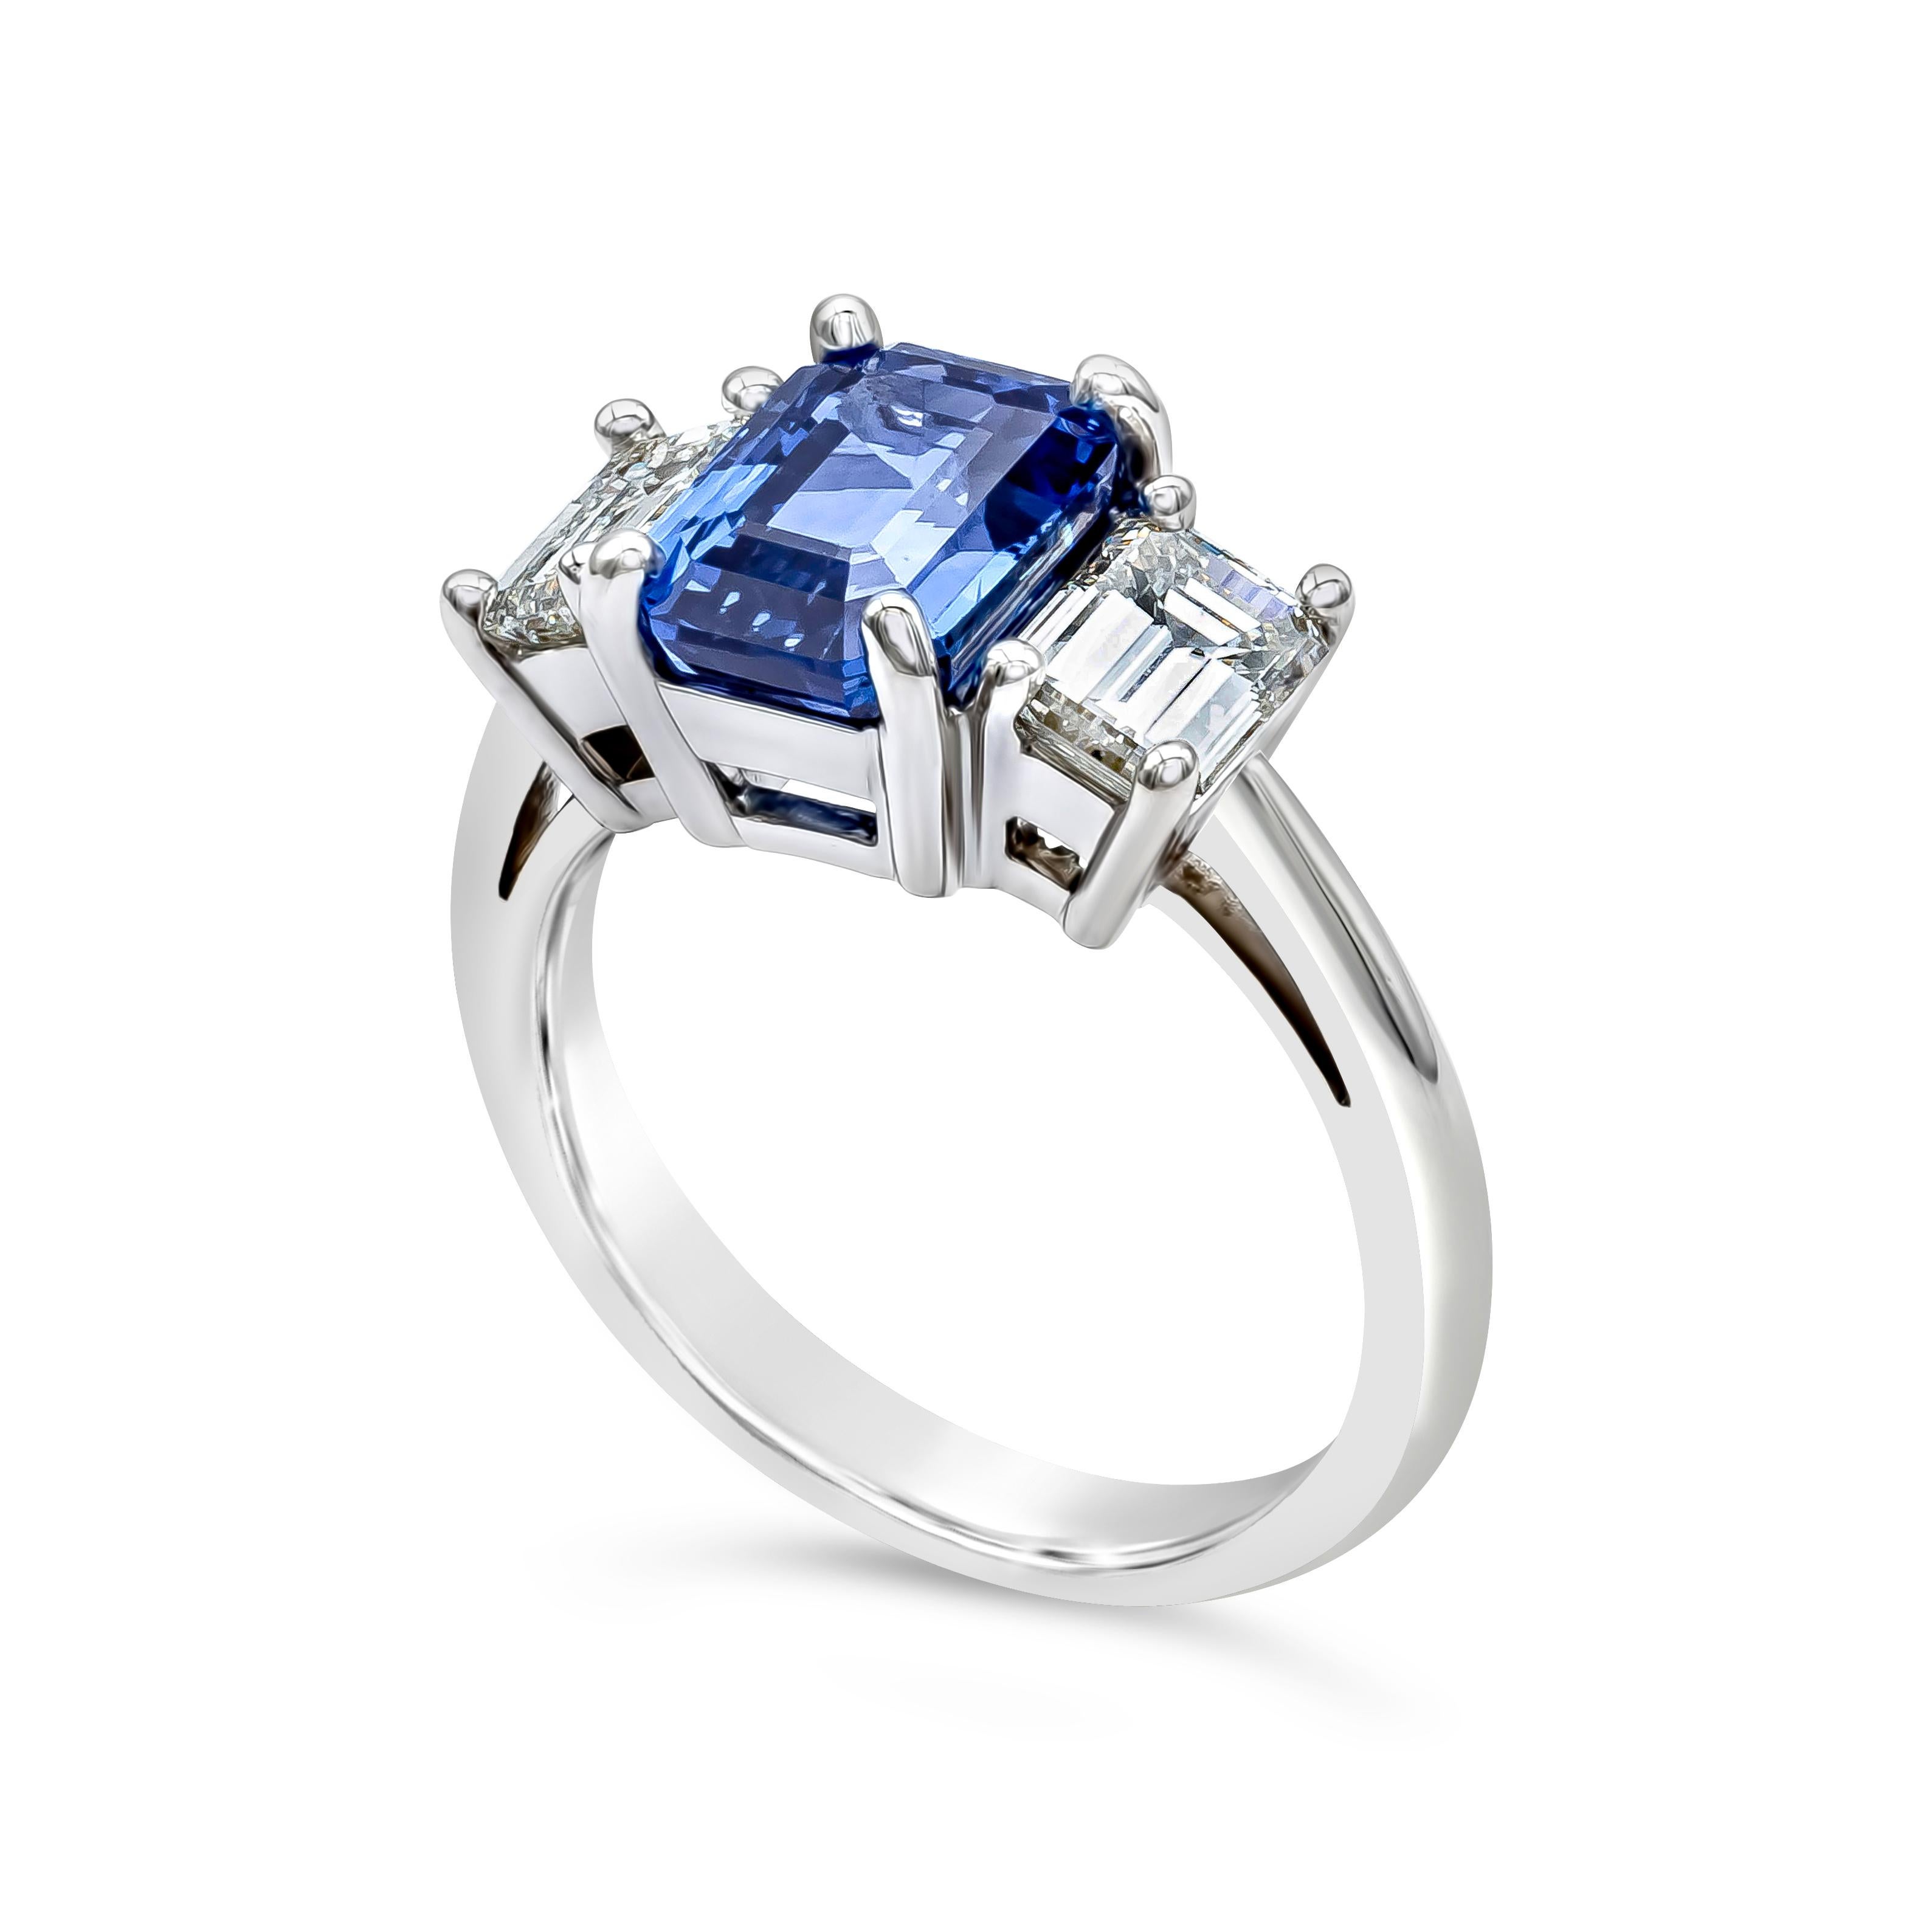 A stunning engagement ring that features a GIA Certified emerald cut blue sapphire weighing 3.25 carats, flanked by two emerald cut diamonds weighing 1.23 carats total, G-H Color and VS in Clarity. Made with Platinum. Size 6.5 US

Roman Malakov is a